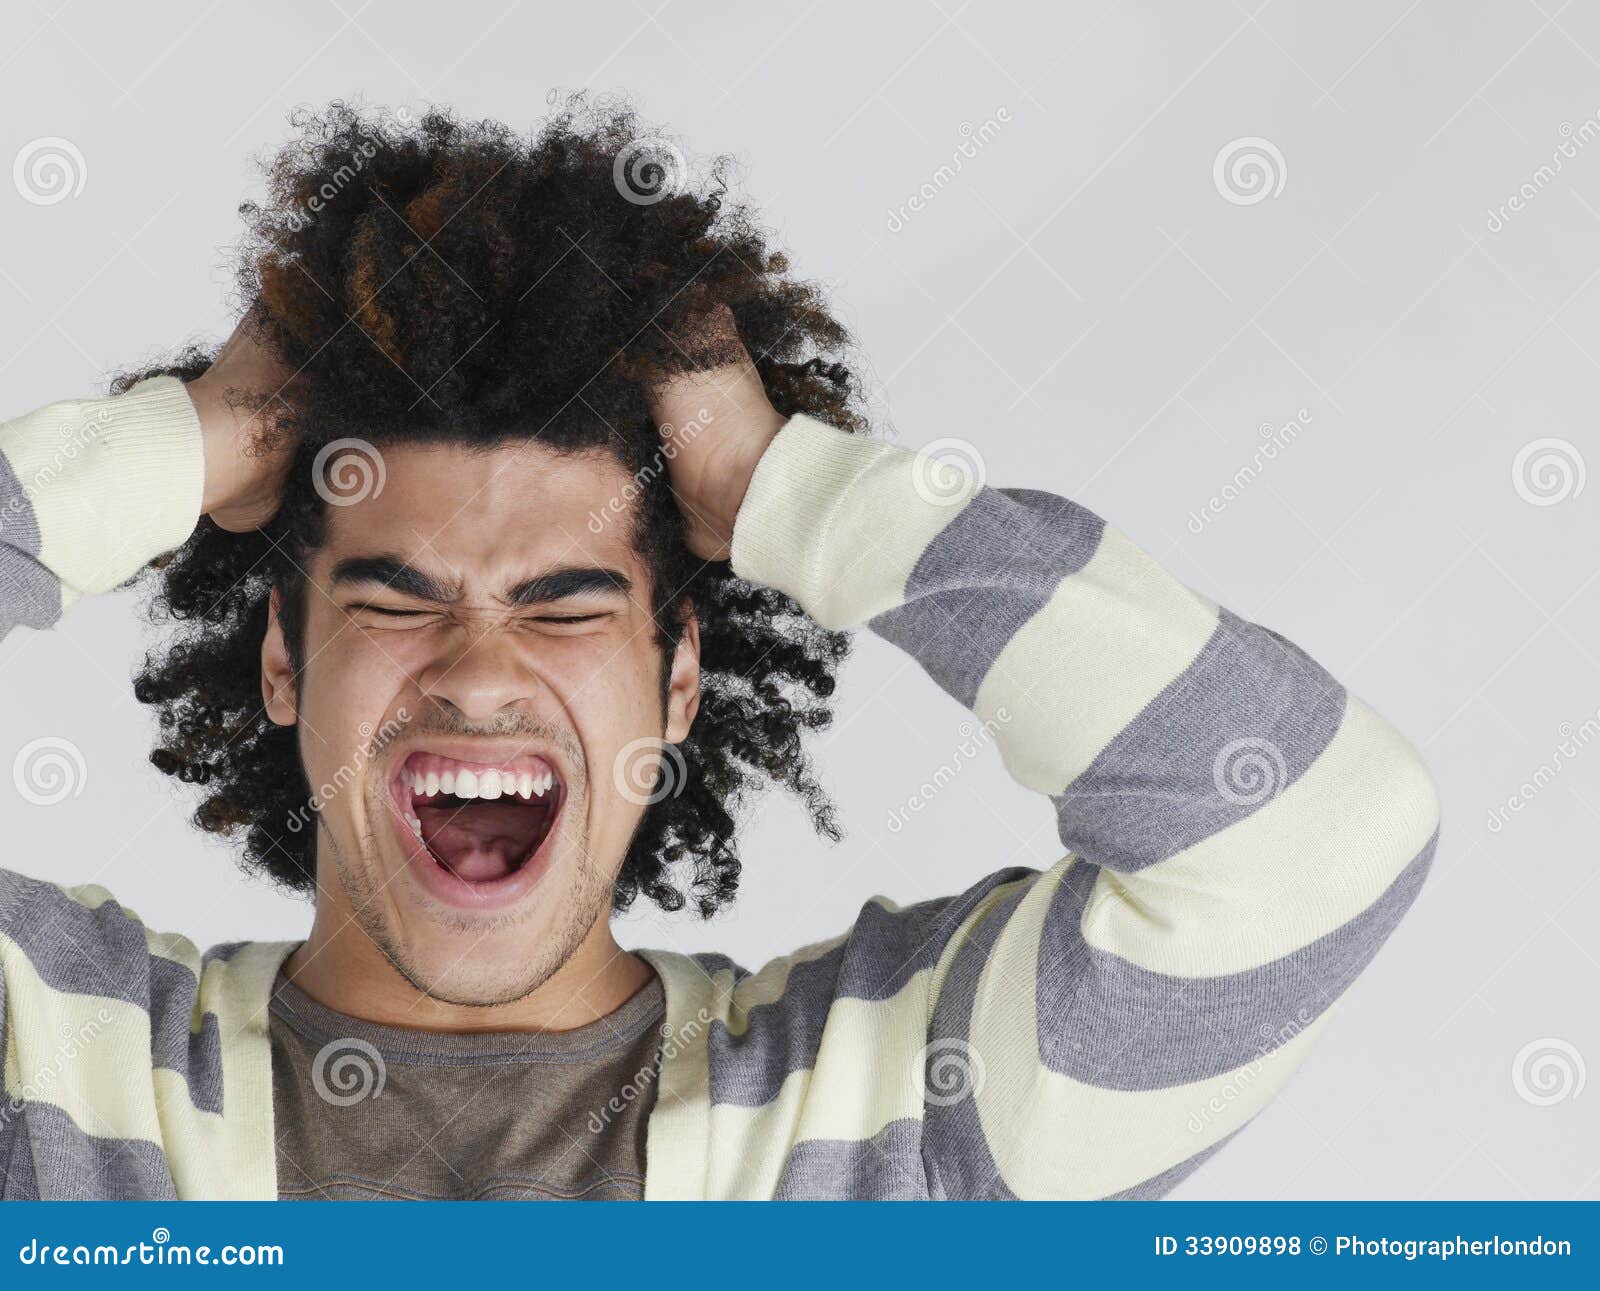 frustrated man with afro hairdo pulling hair